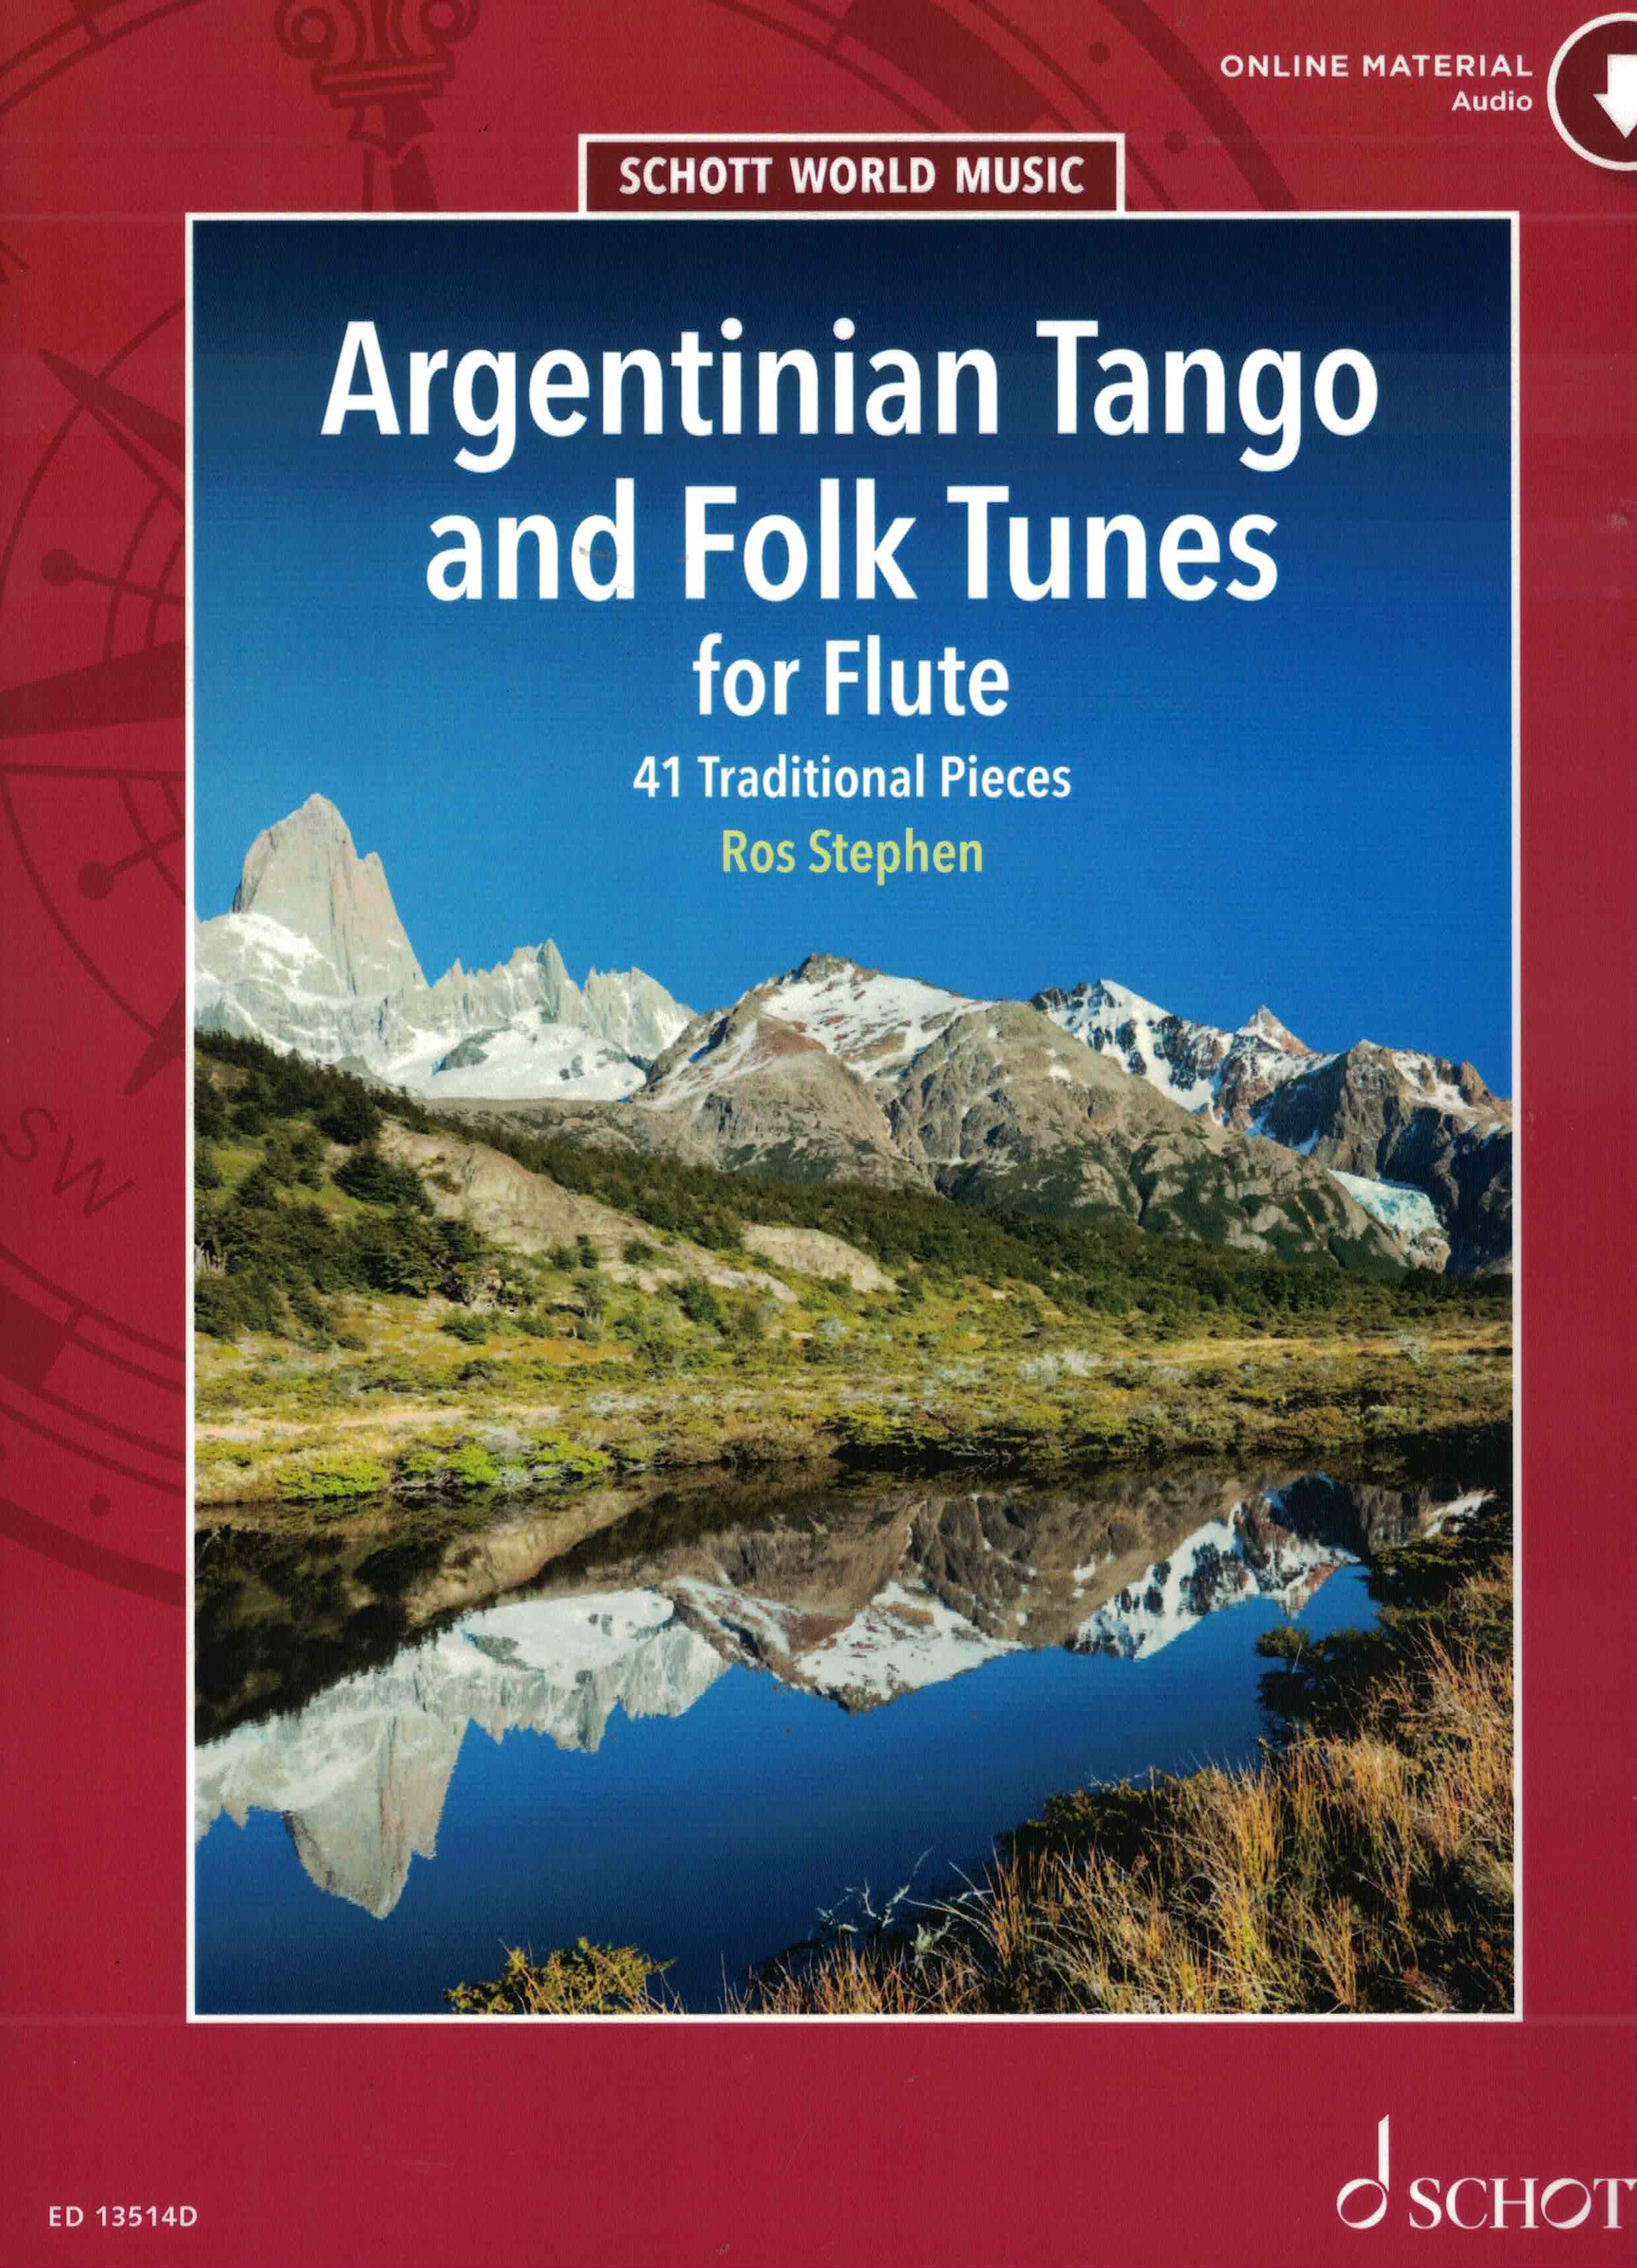 Argentinian Tango and Folk Tunes - 1- 2 Fl online material